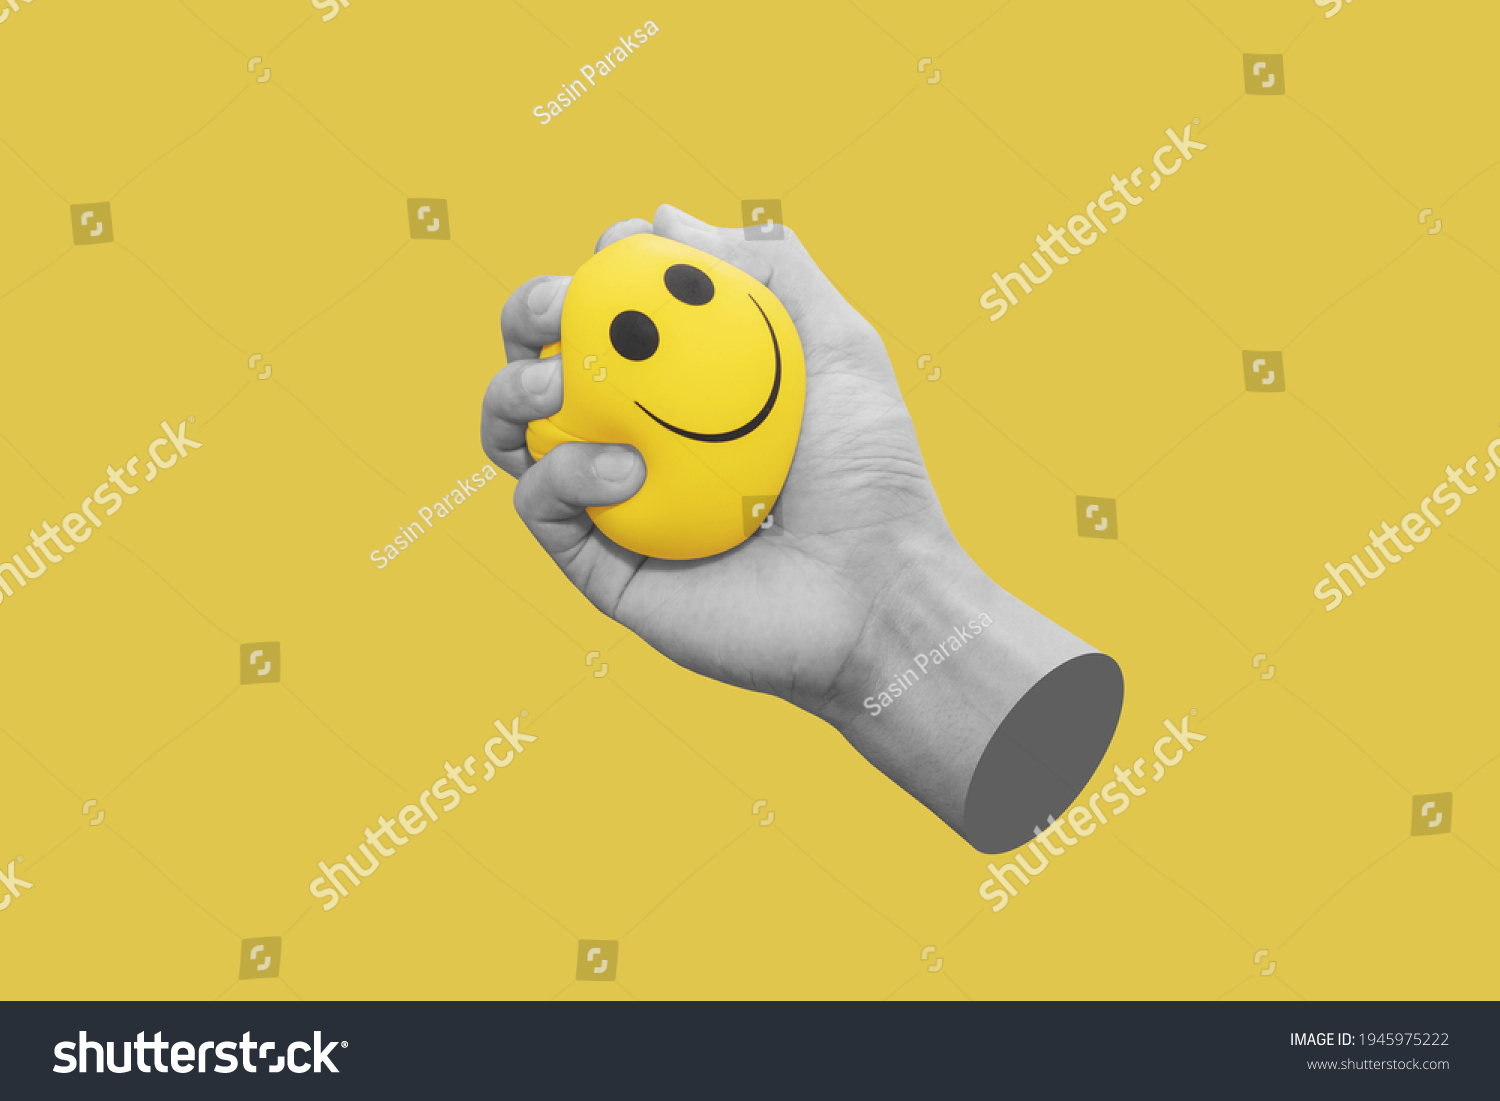 Hand squeeze yellow stress ball, isolated on yellow background #1945975222